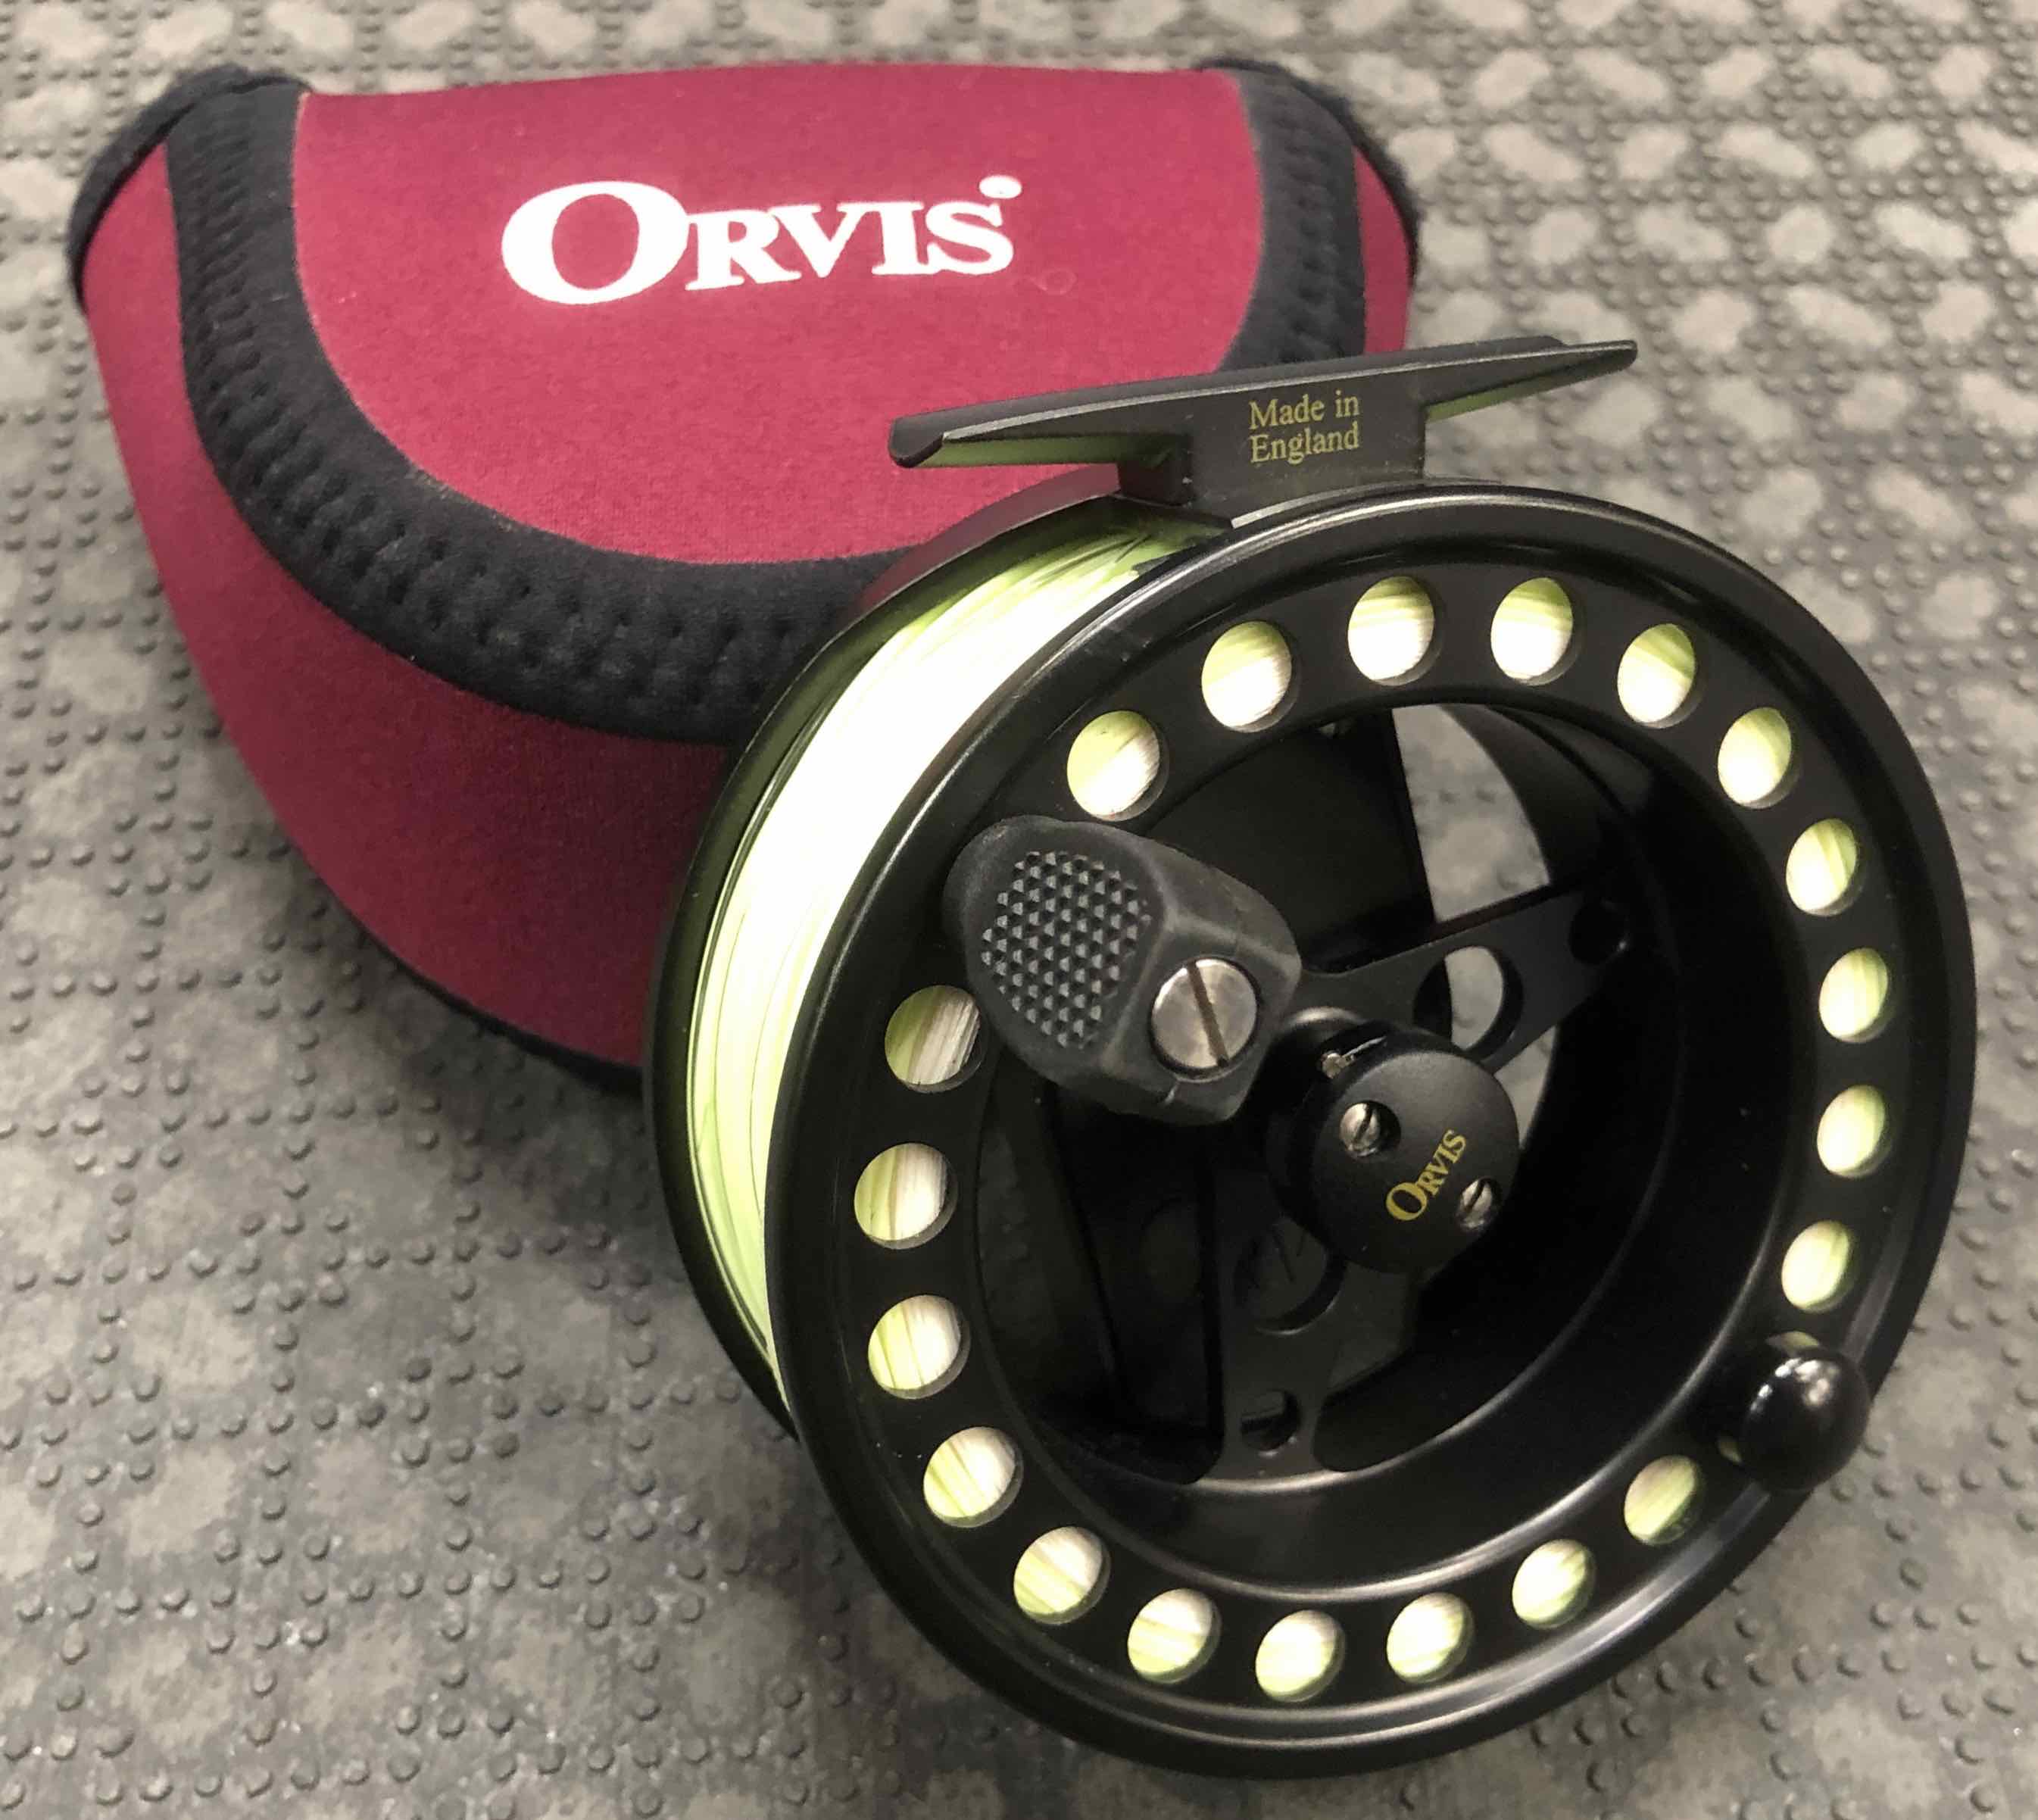 https://thefirstcast.ca/wp-content/uploads/2019/04/Orvis-Battenkill-Made-in-England-Fly-Reel-Black-cw-Scientific-Anglers-WF8F-Fly-Line-AA.jpg